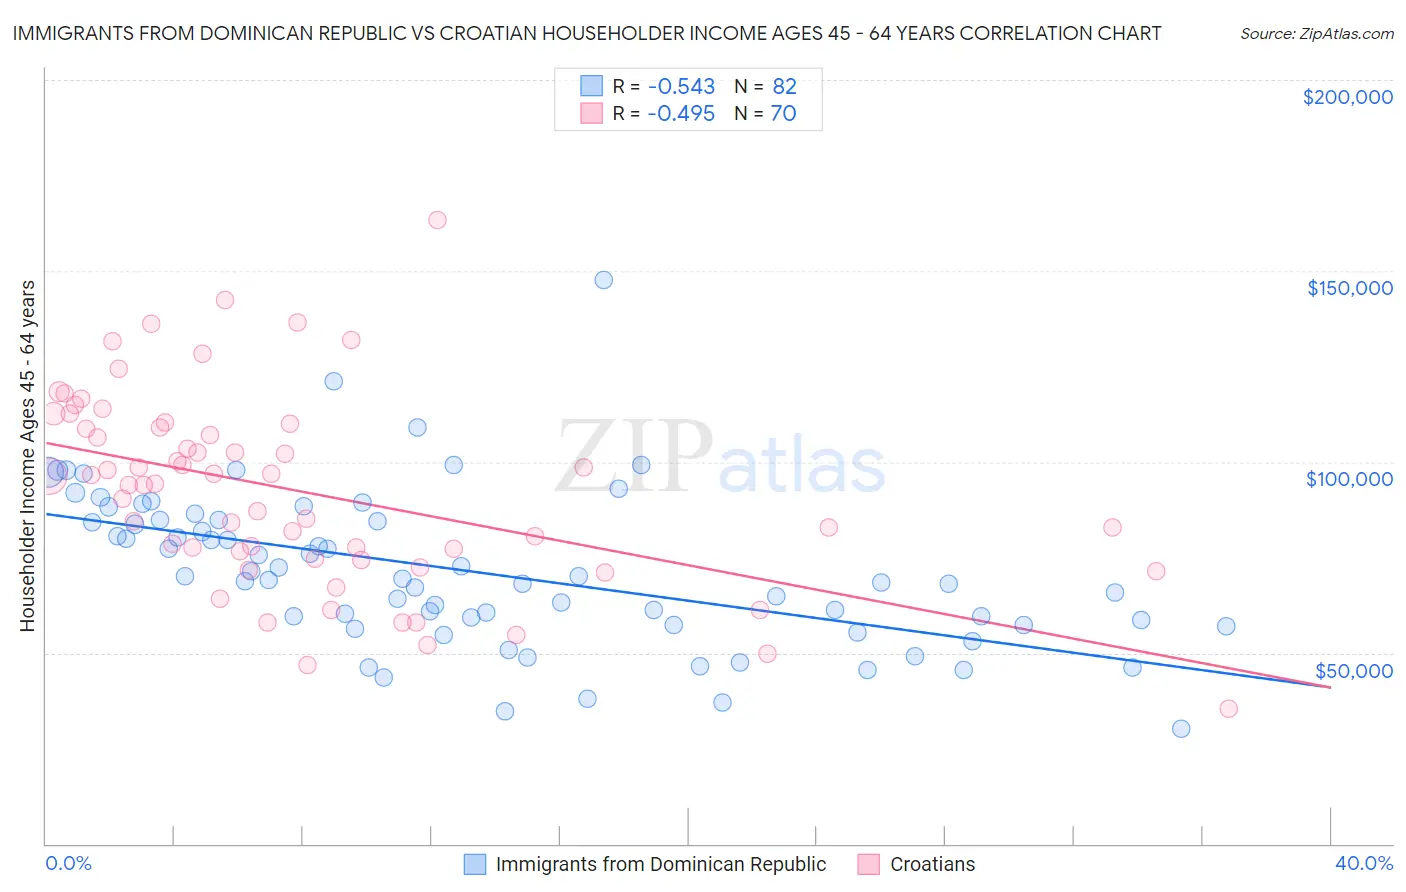 Immigrants from Dominican Republic vs Croatian Householder Income Ages 45 - 64 years